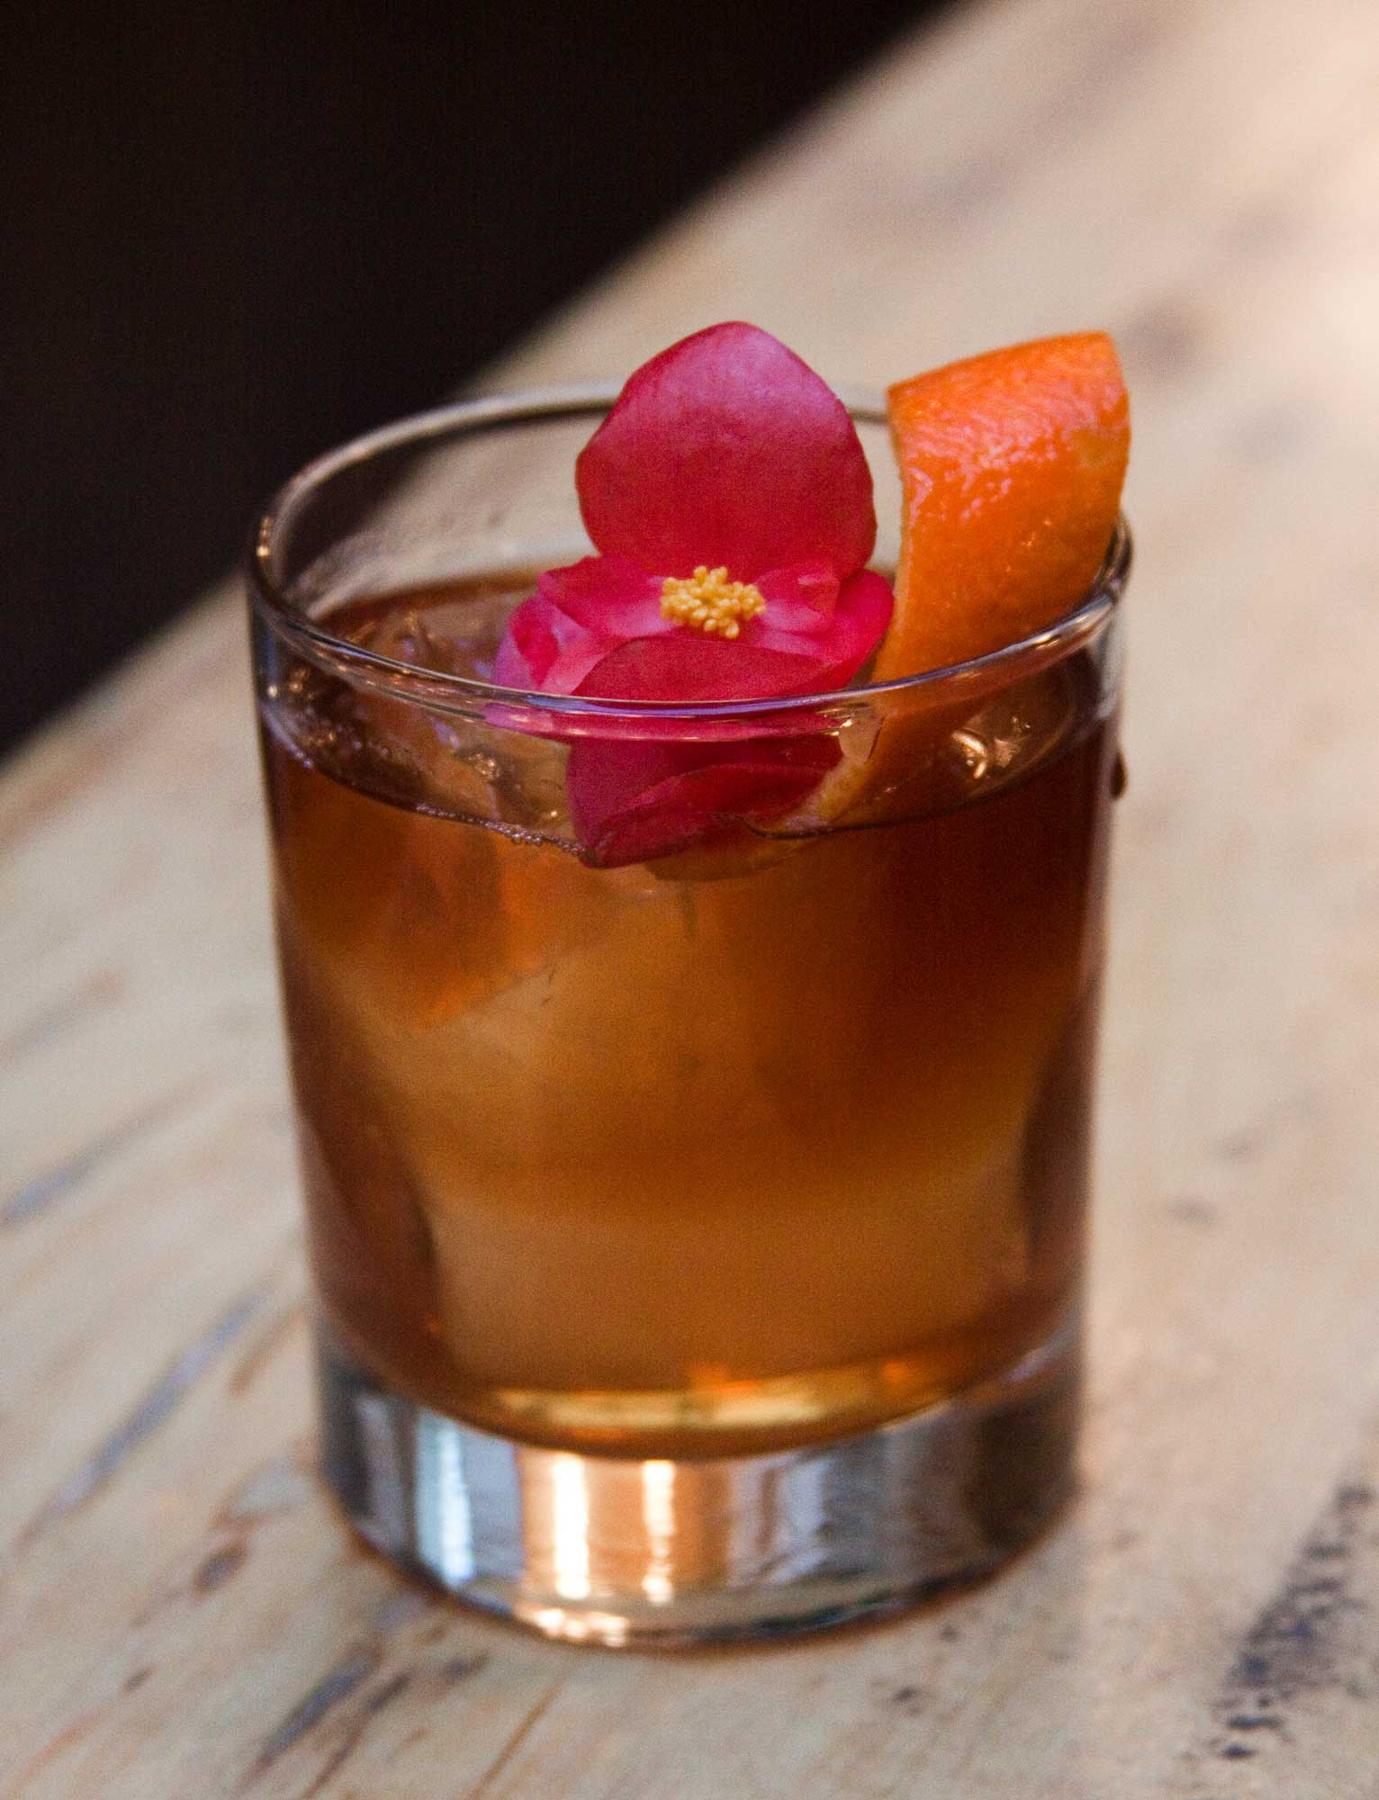 An example of the Redden Plain, the mixed drink (drink), by Ty Williams, Sisters, Brooklyn, featuring Mattei Cap Corse Rouge Quinquina, Svöl Swedish-style Aquavit, Salers Gentian Apéritif, and orange twist; photo by Austin Phelps